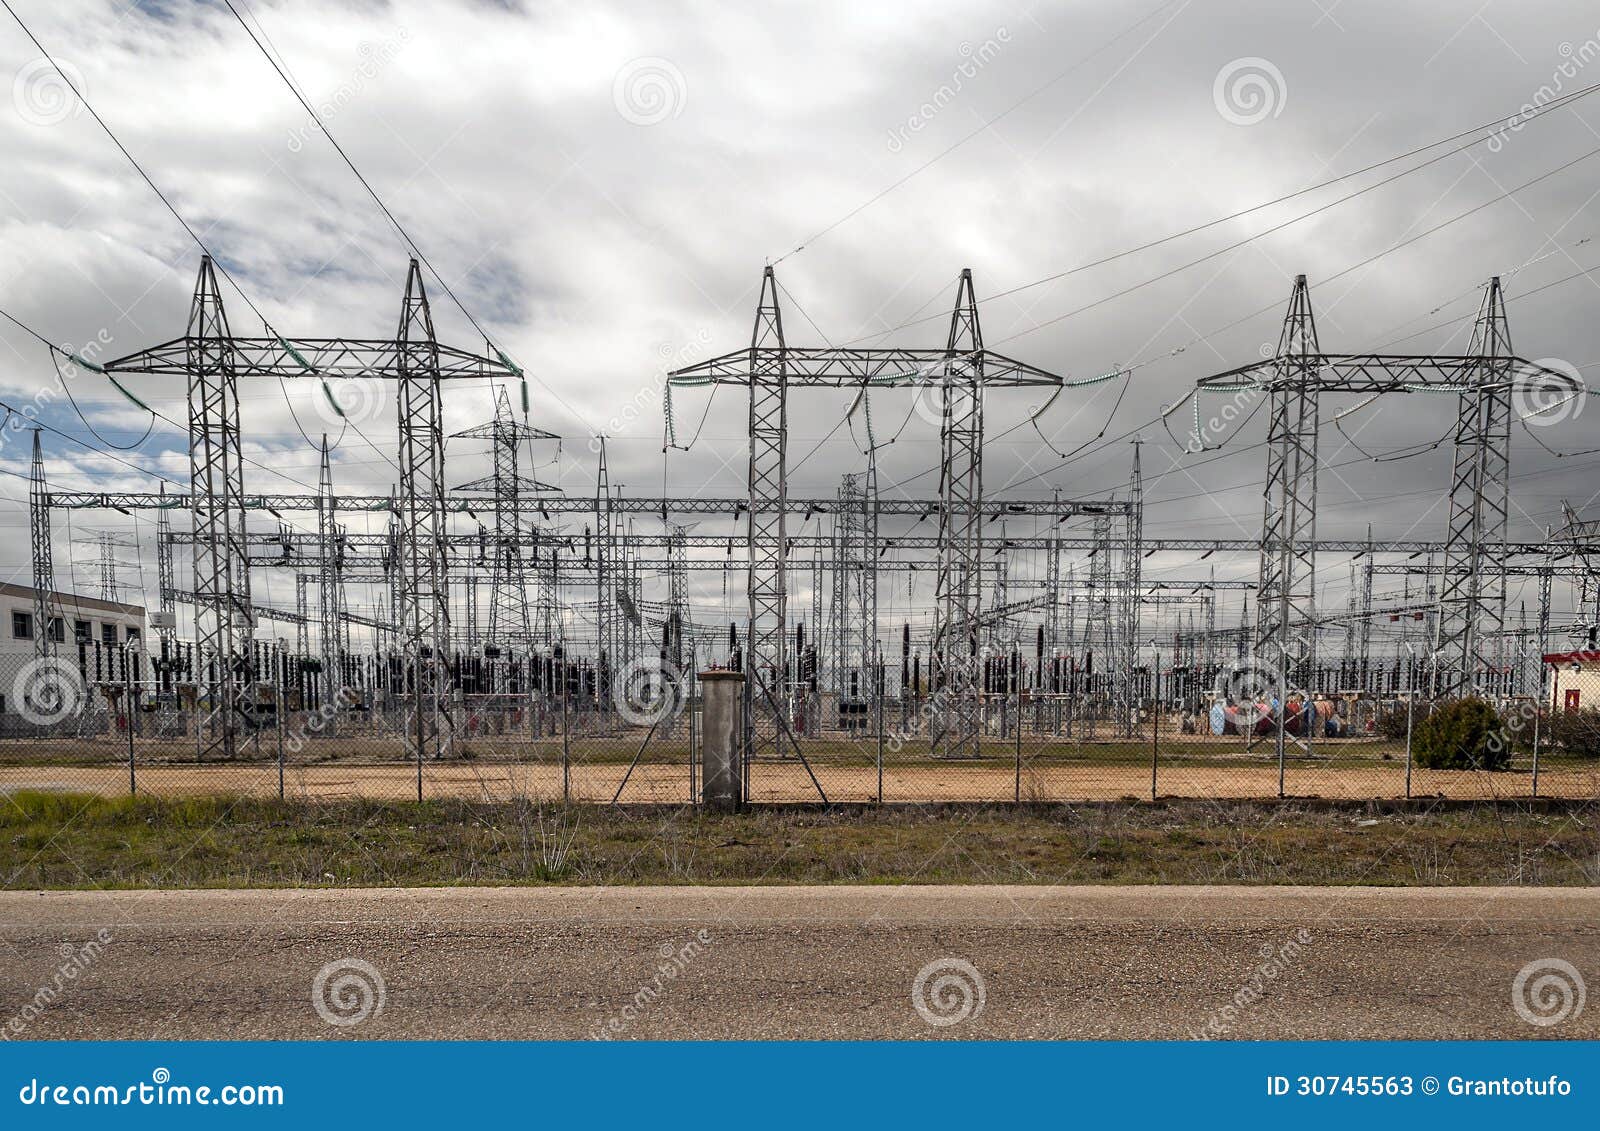 electric power plant